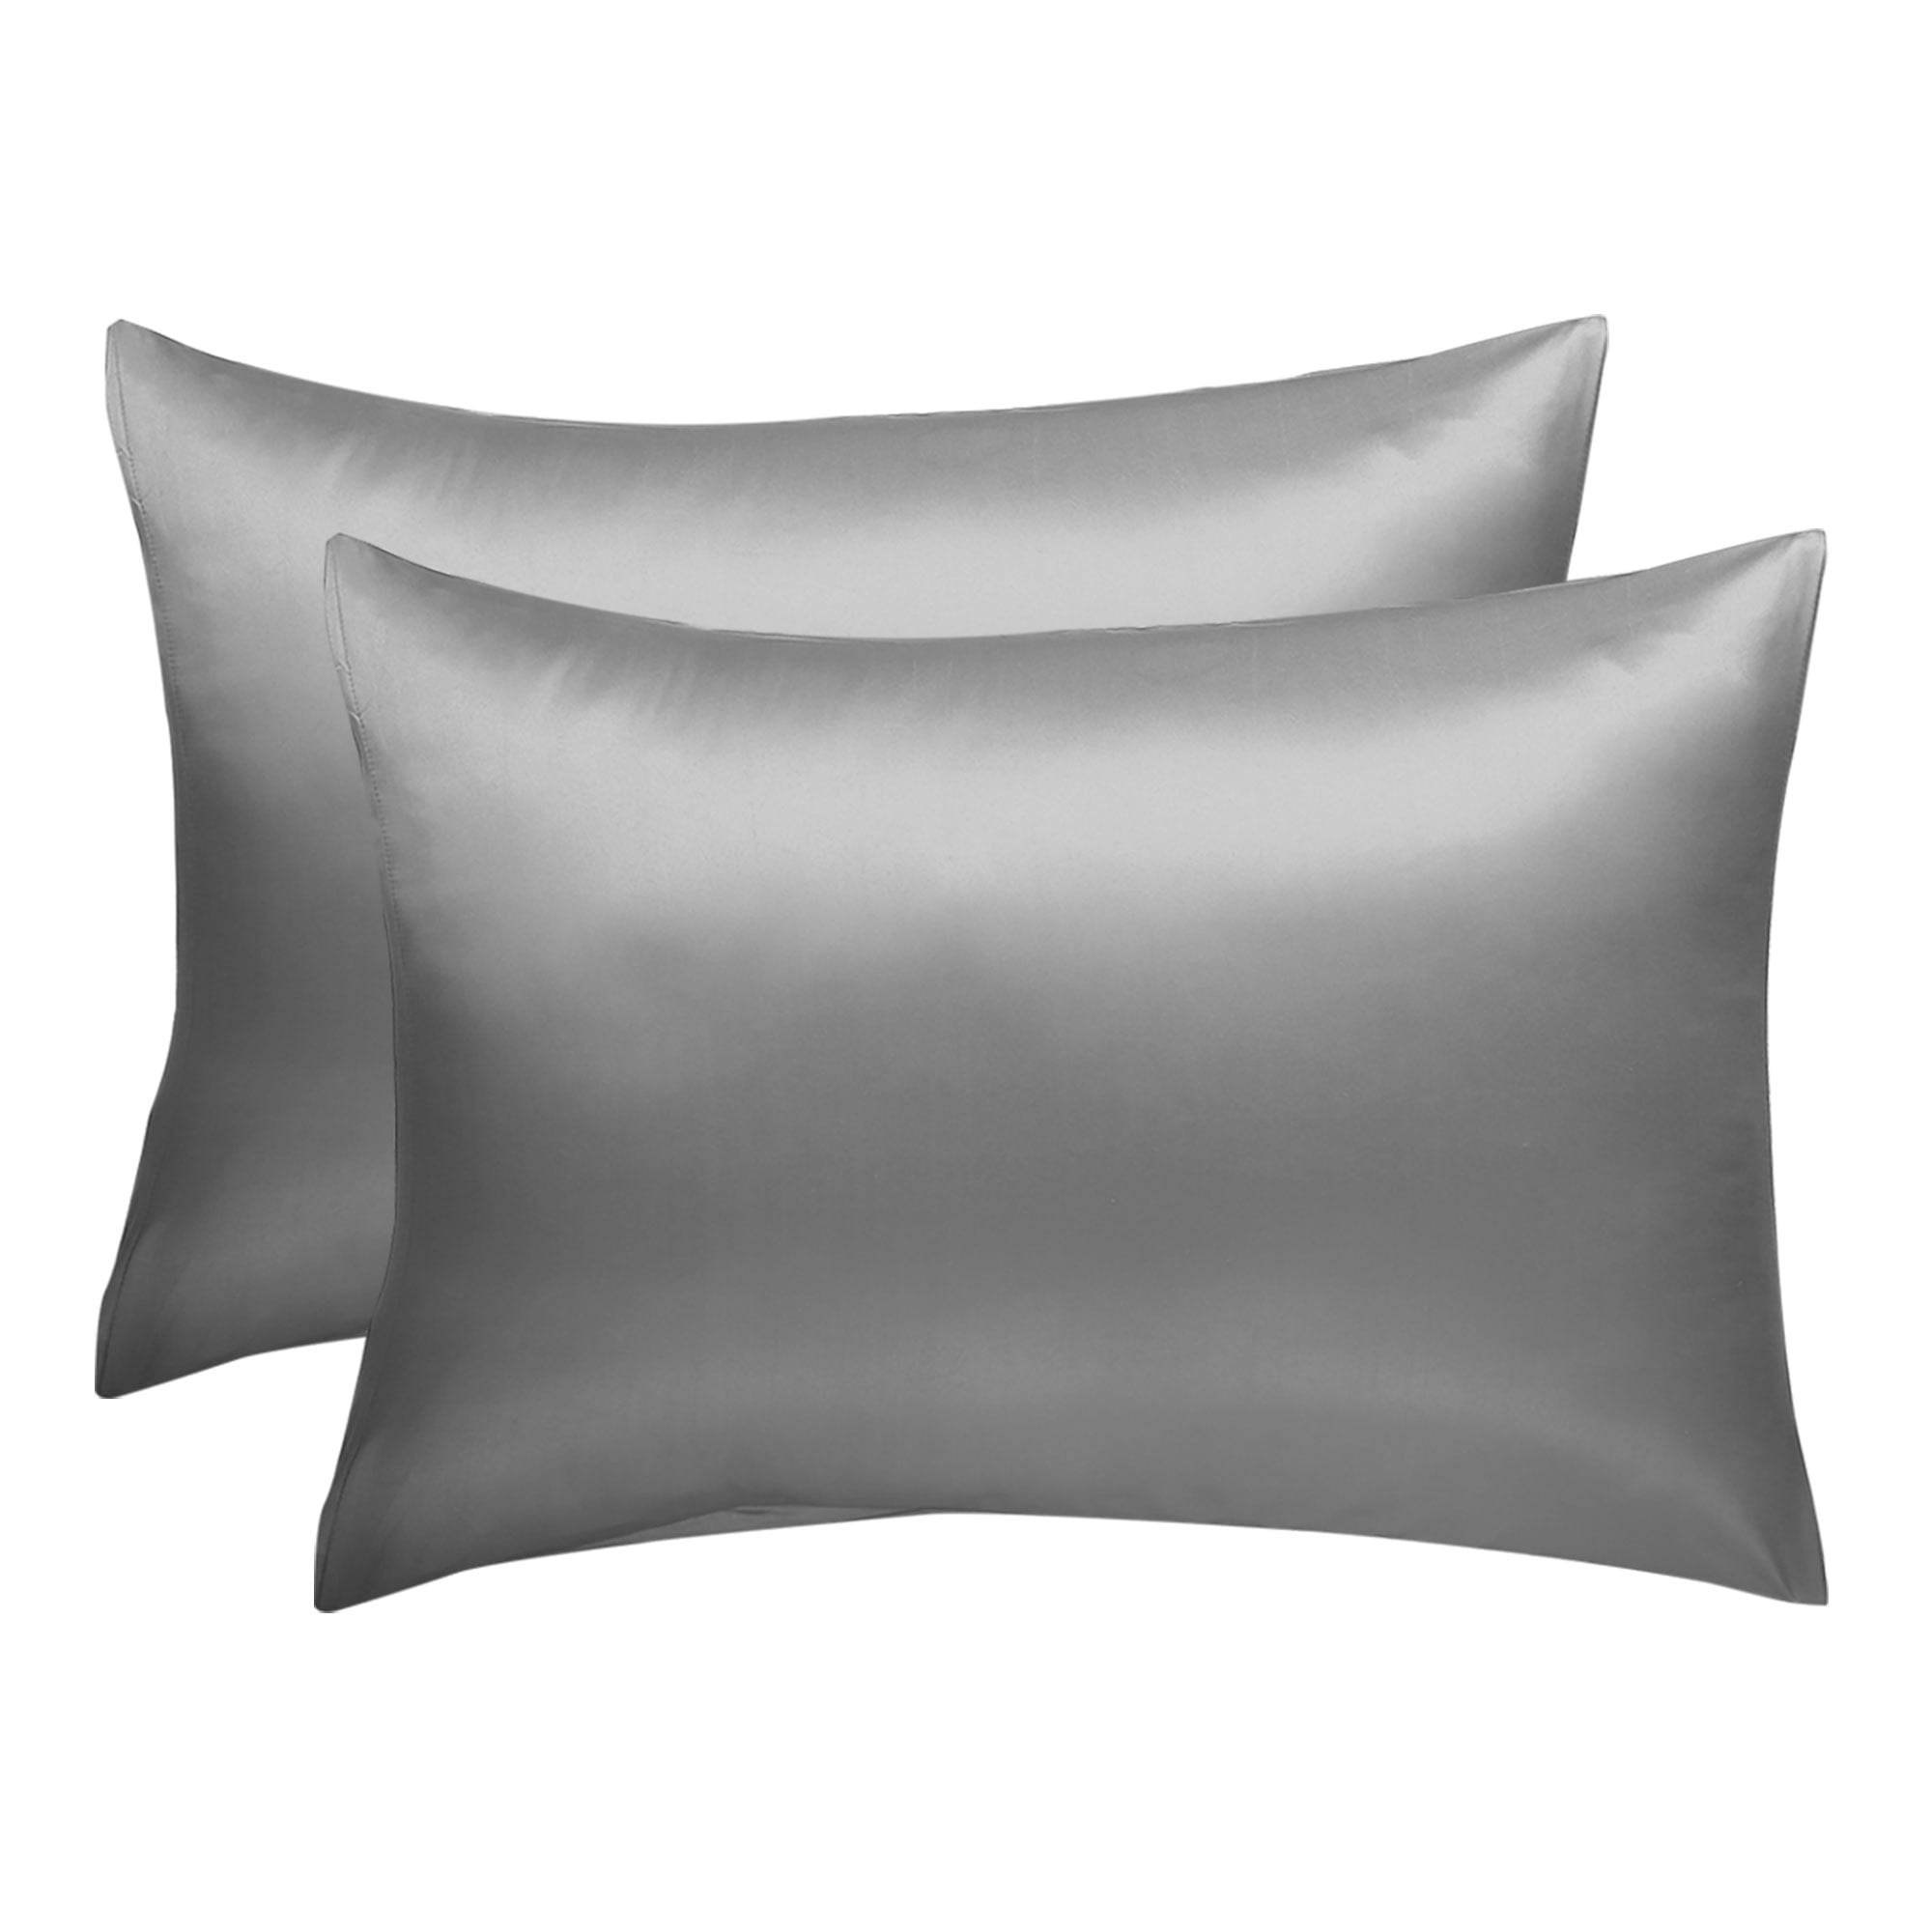 SATIN PILLOW CASES-STANDARD-NICE & SOFT--GOLD--GREAT GIFT-PICK FROM 4 COLORS 2 